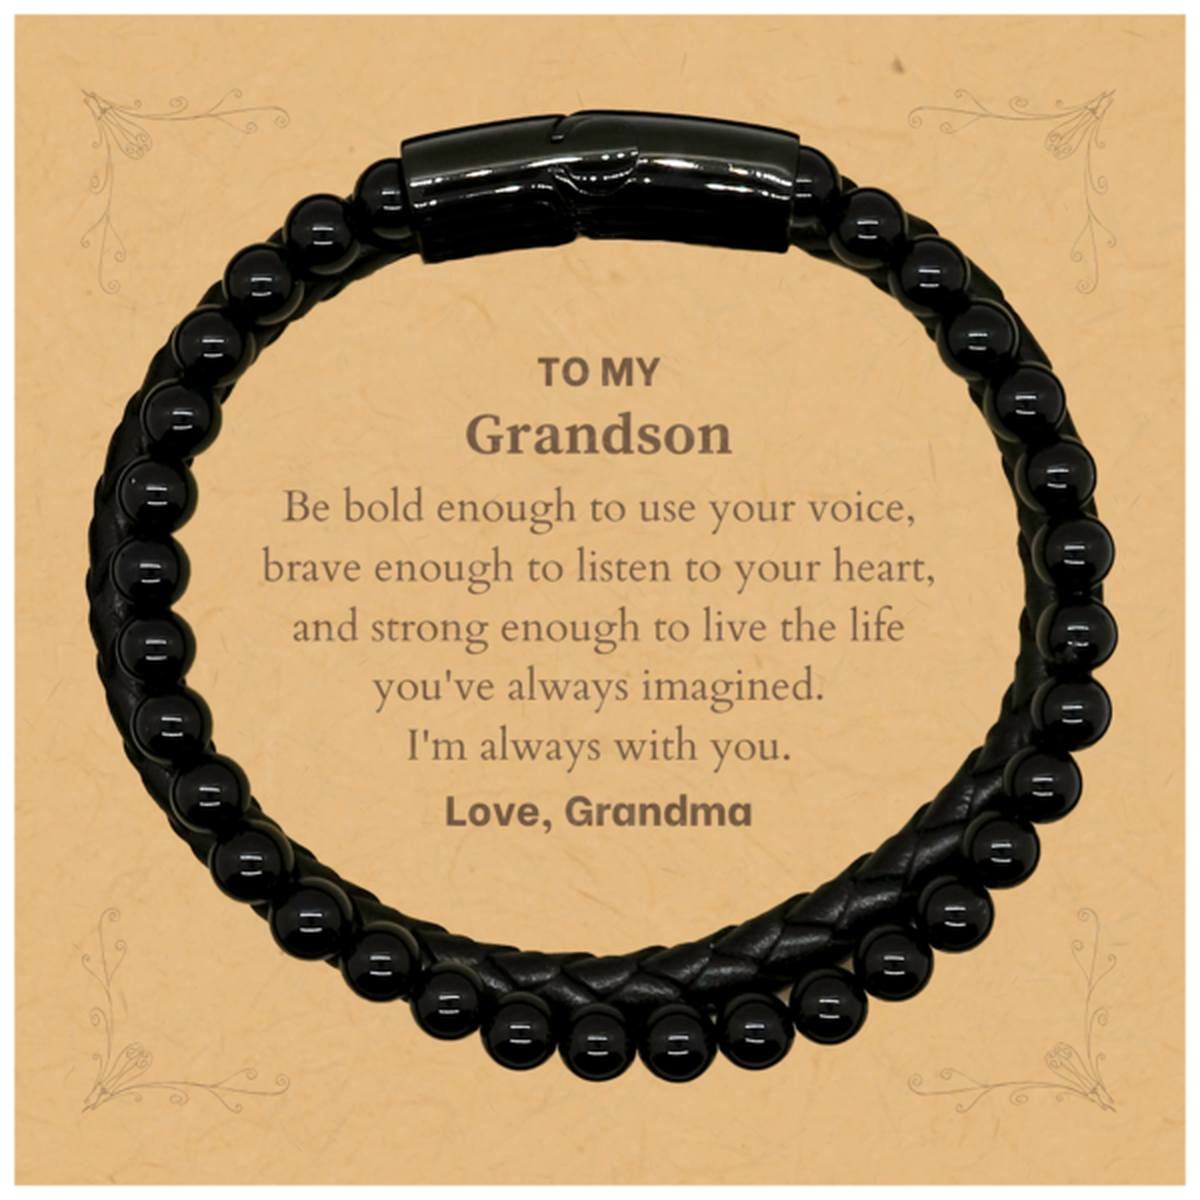 Keepsake Grandson Stone Leather Bracelets Gift Idea Graduation Christmas Birthday Grandson from Grandma, Grandson Be bold enough to use your voice, brave enough to listen to your heart. Love, Grandma